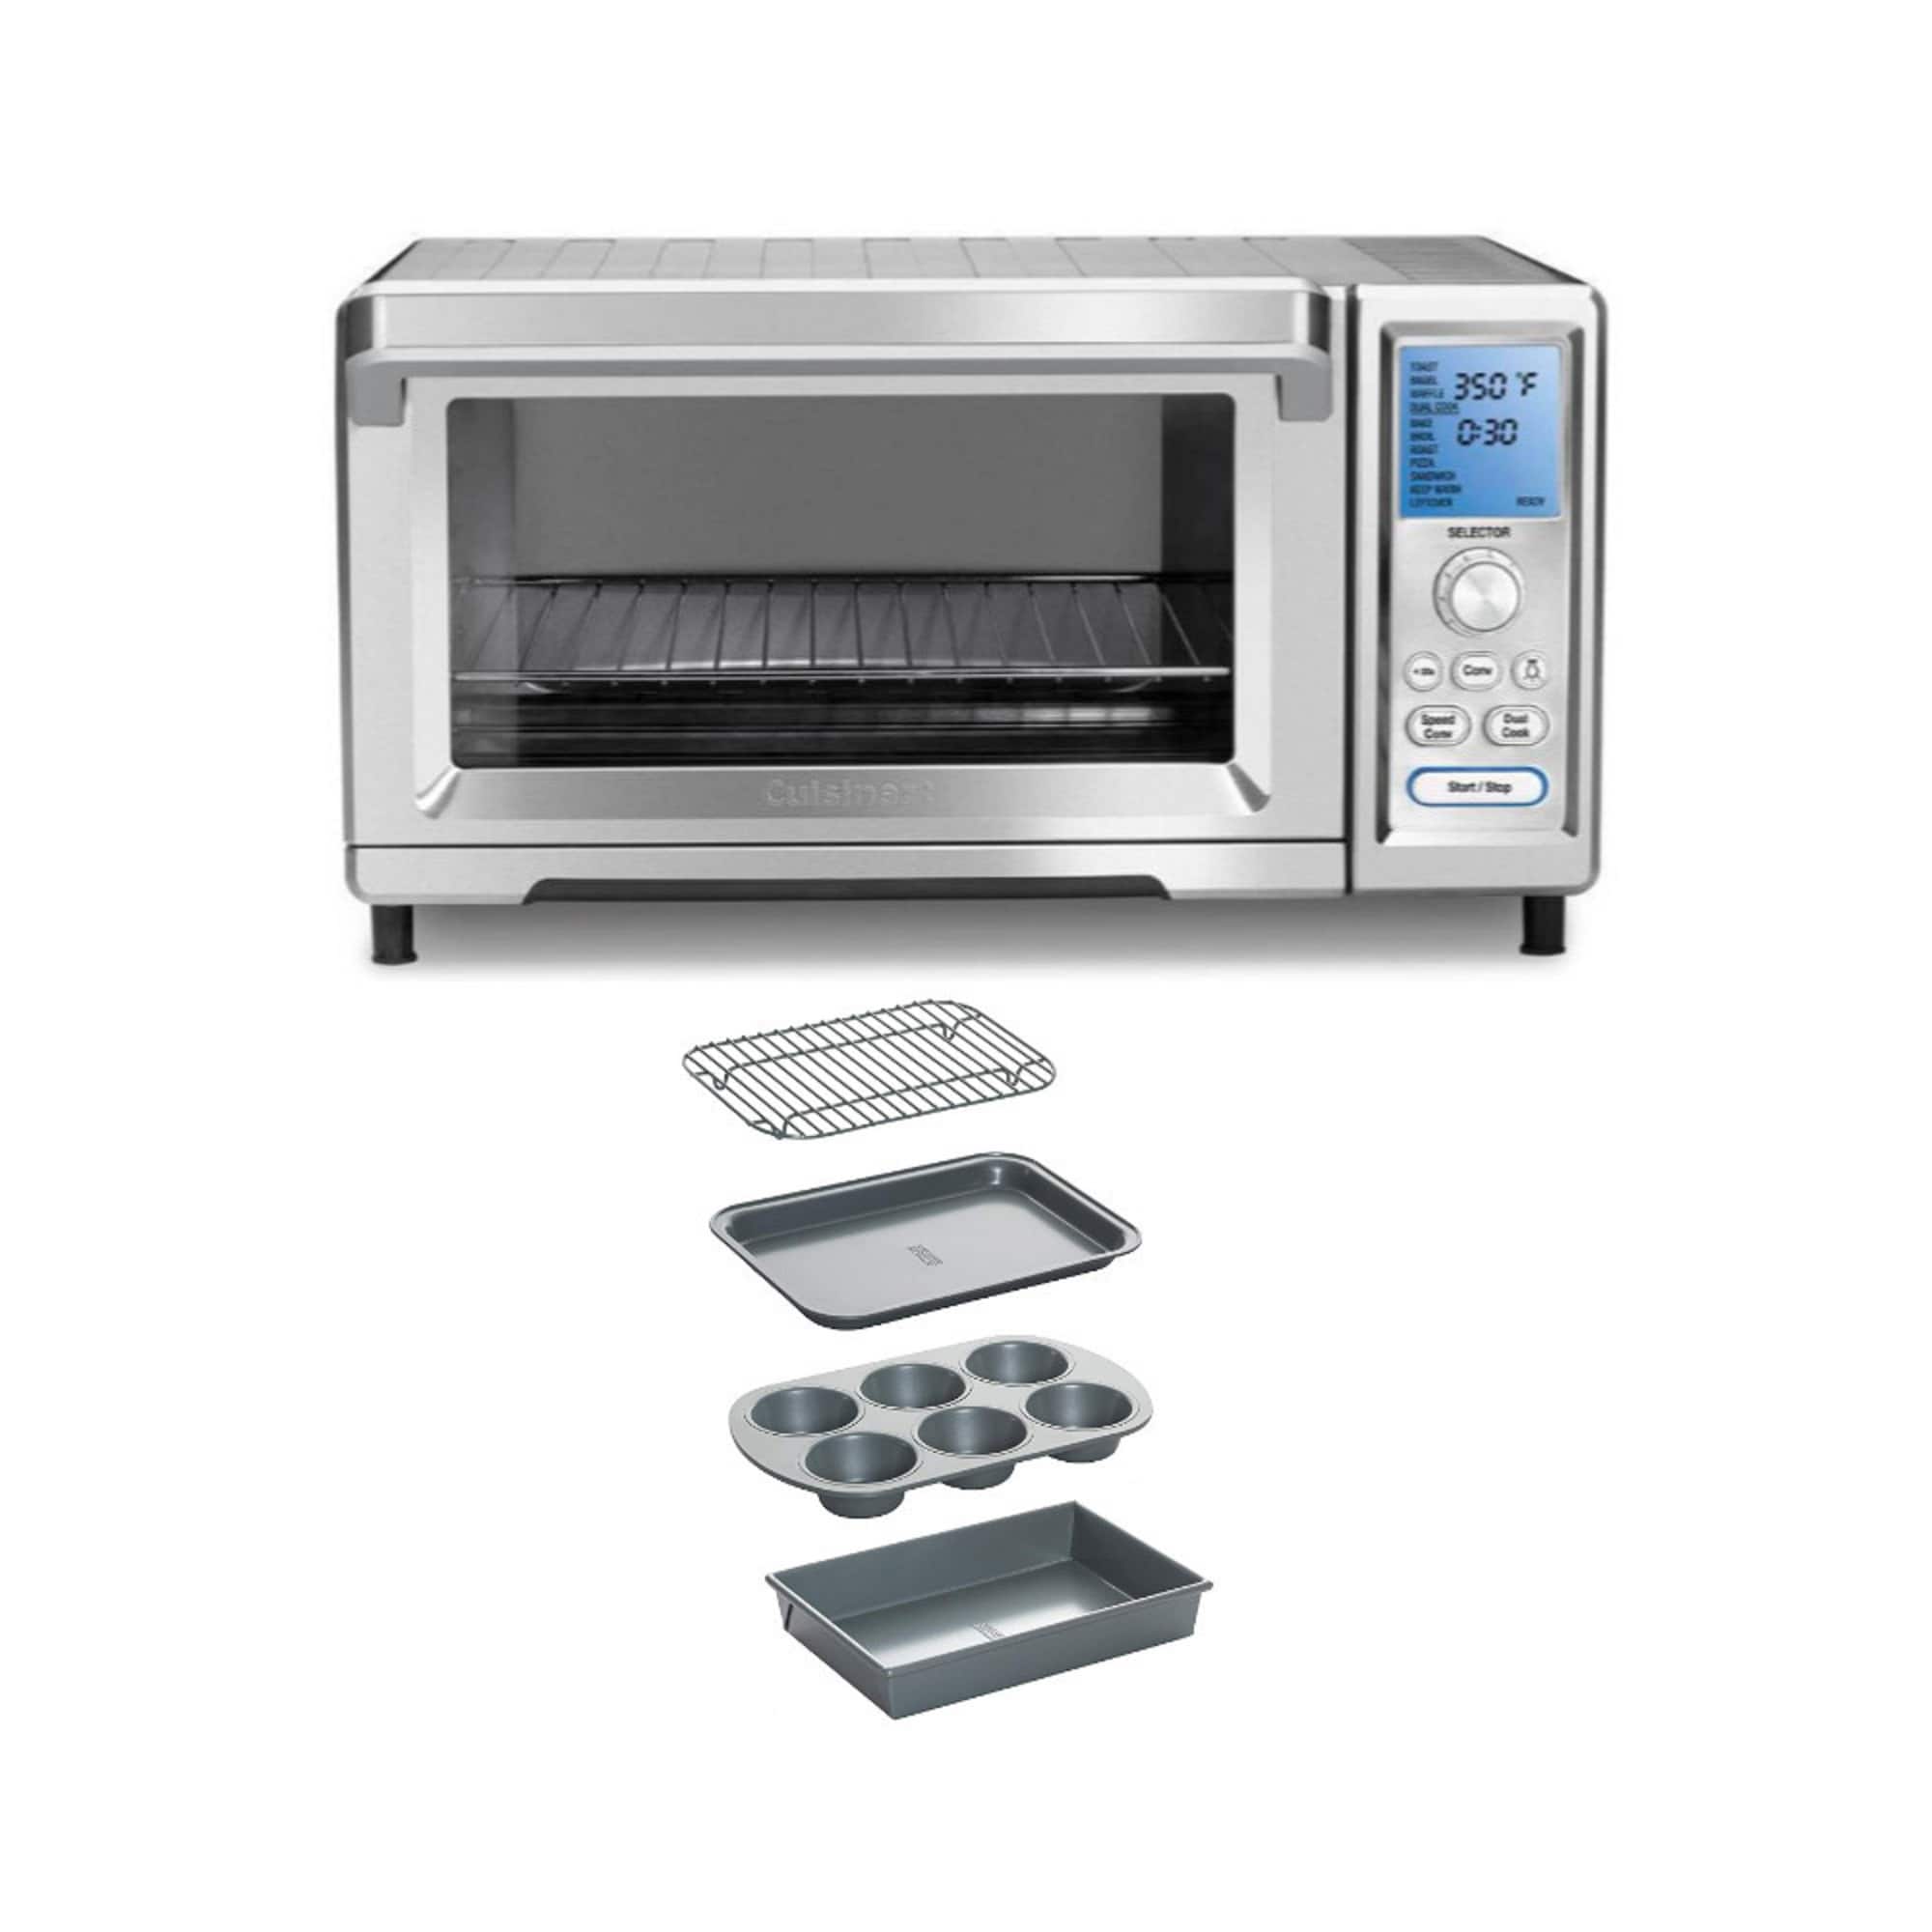 https://ak1.ostkcdn.com/images/products/is/images/direct/8ea8d3549ec3cde6081b657595f93bcc994ce712/Cuisinart-Chef%27s-Convection-Toaster-Oven-with-4-Piece-Bakeware-Set.jpg